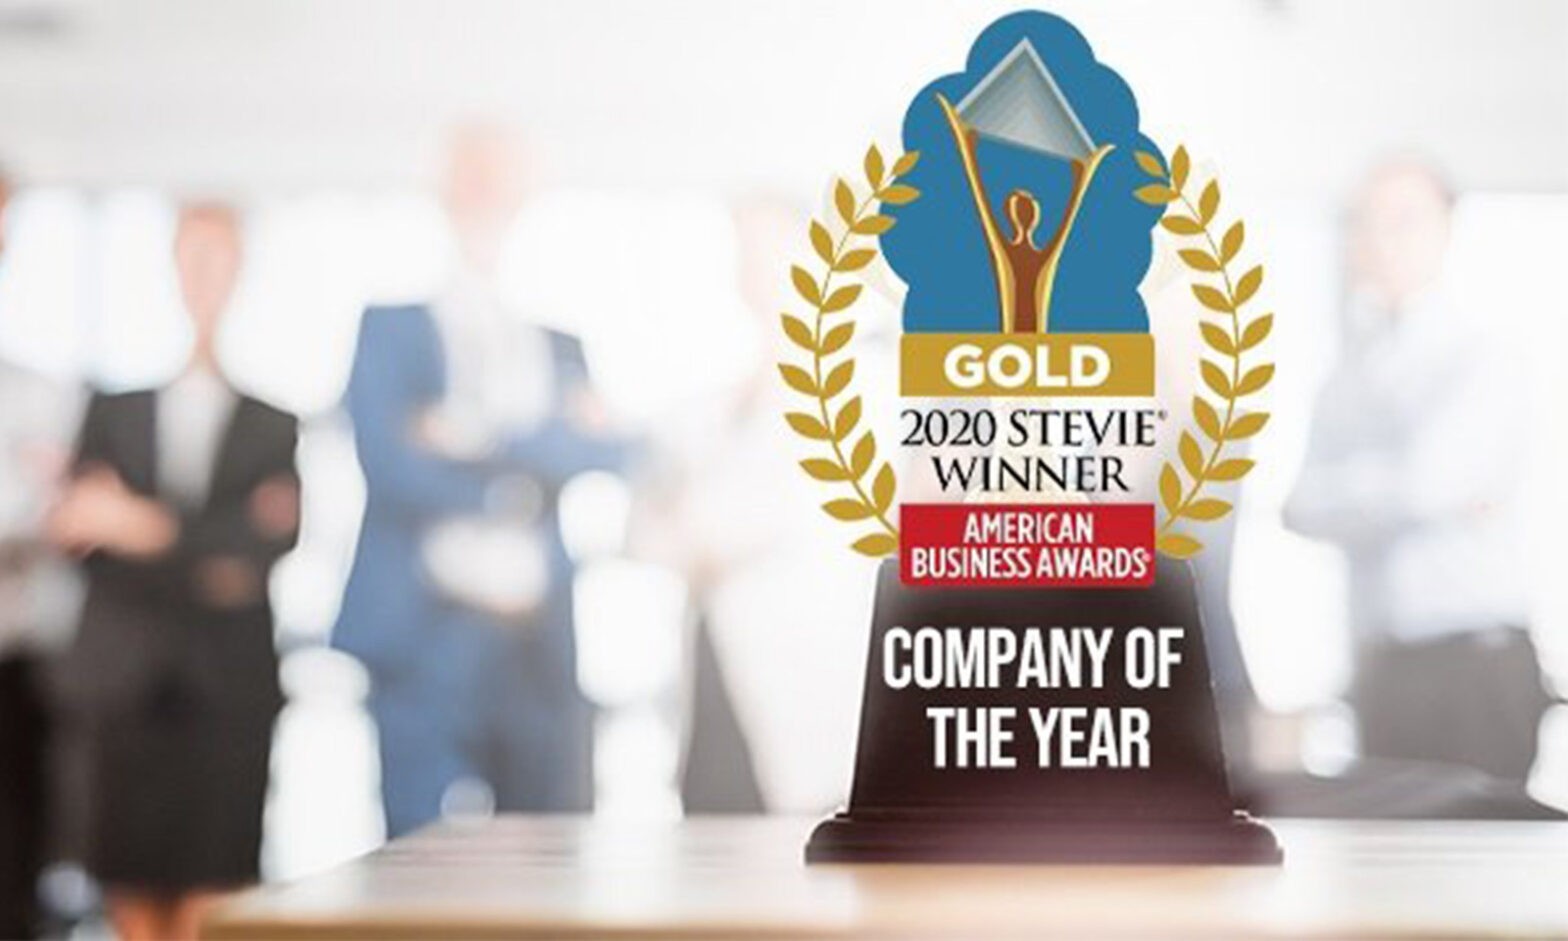 Featured image for post: VDS TAKES HOME THE GOLD IN THE AMERICAN BUSINESS AWARDS